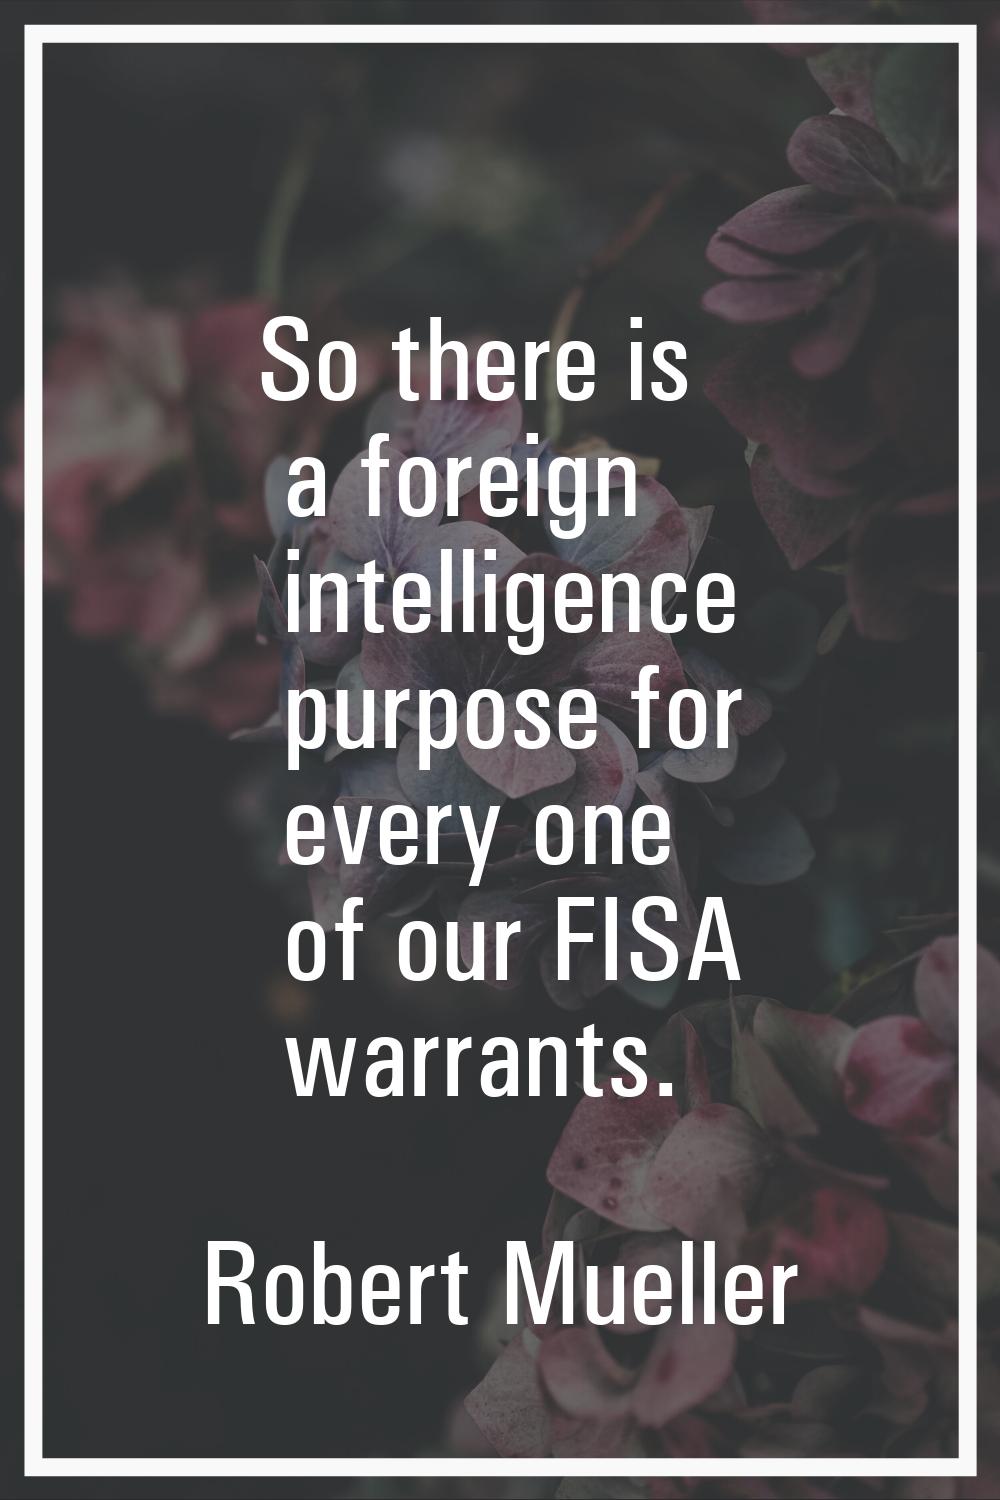 So there is a foreign intelligence purpose for every one of our FISA warrants.